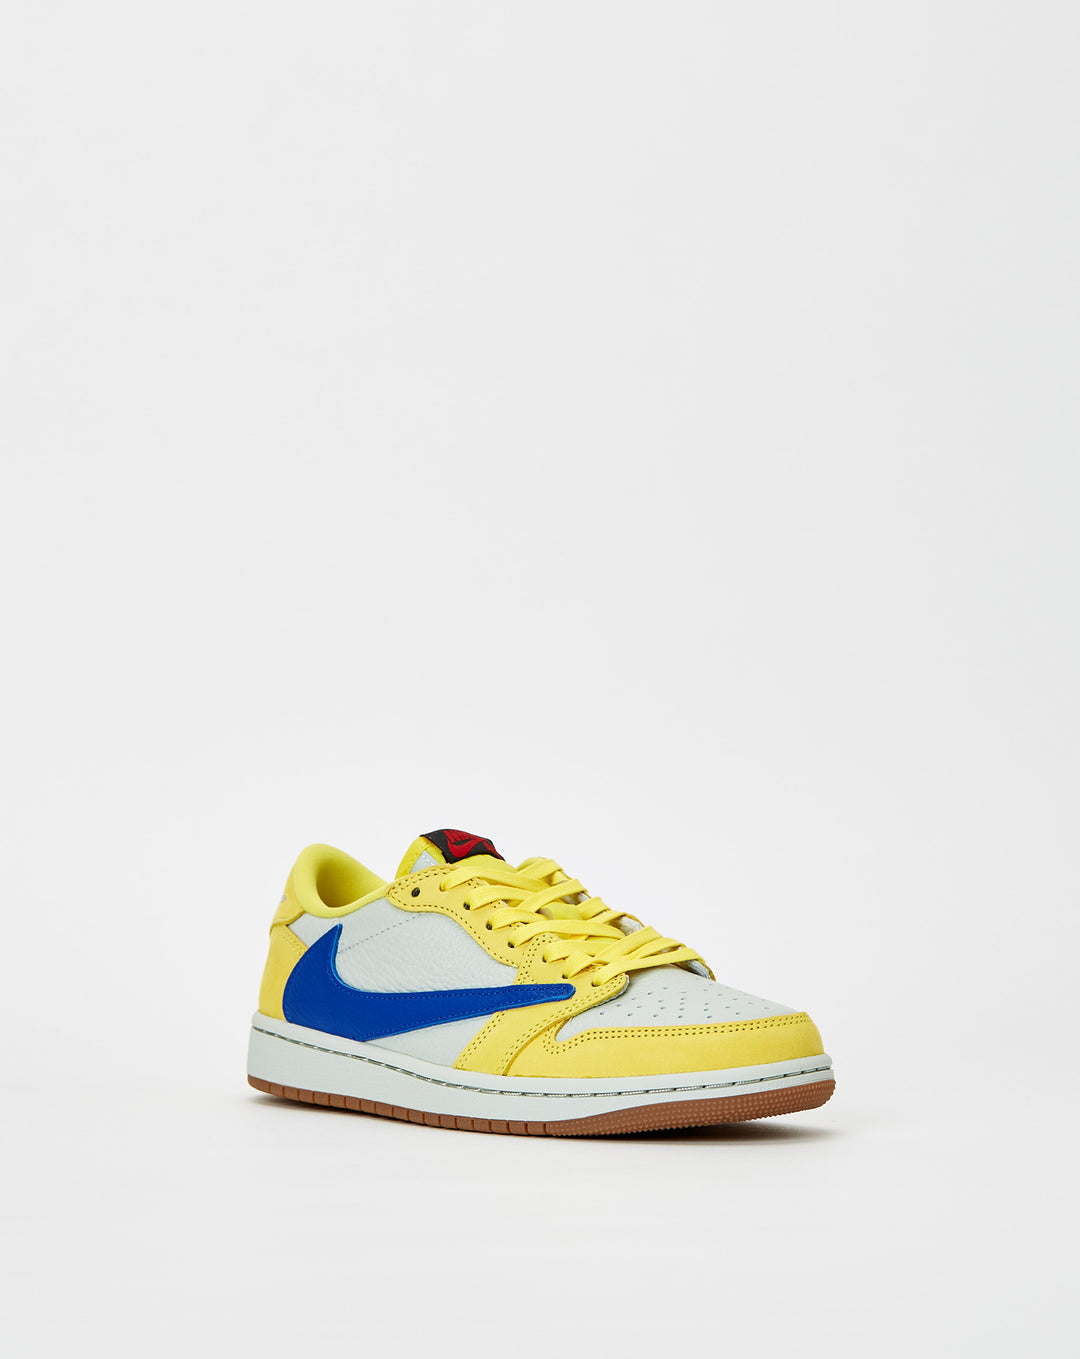 nike dunks new arrivals shoes clearance women